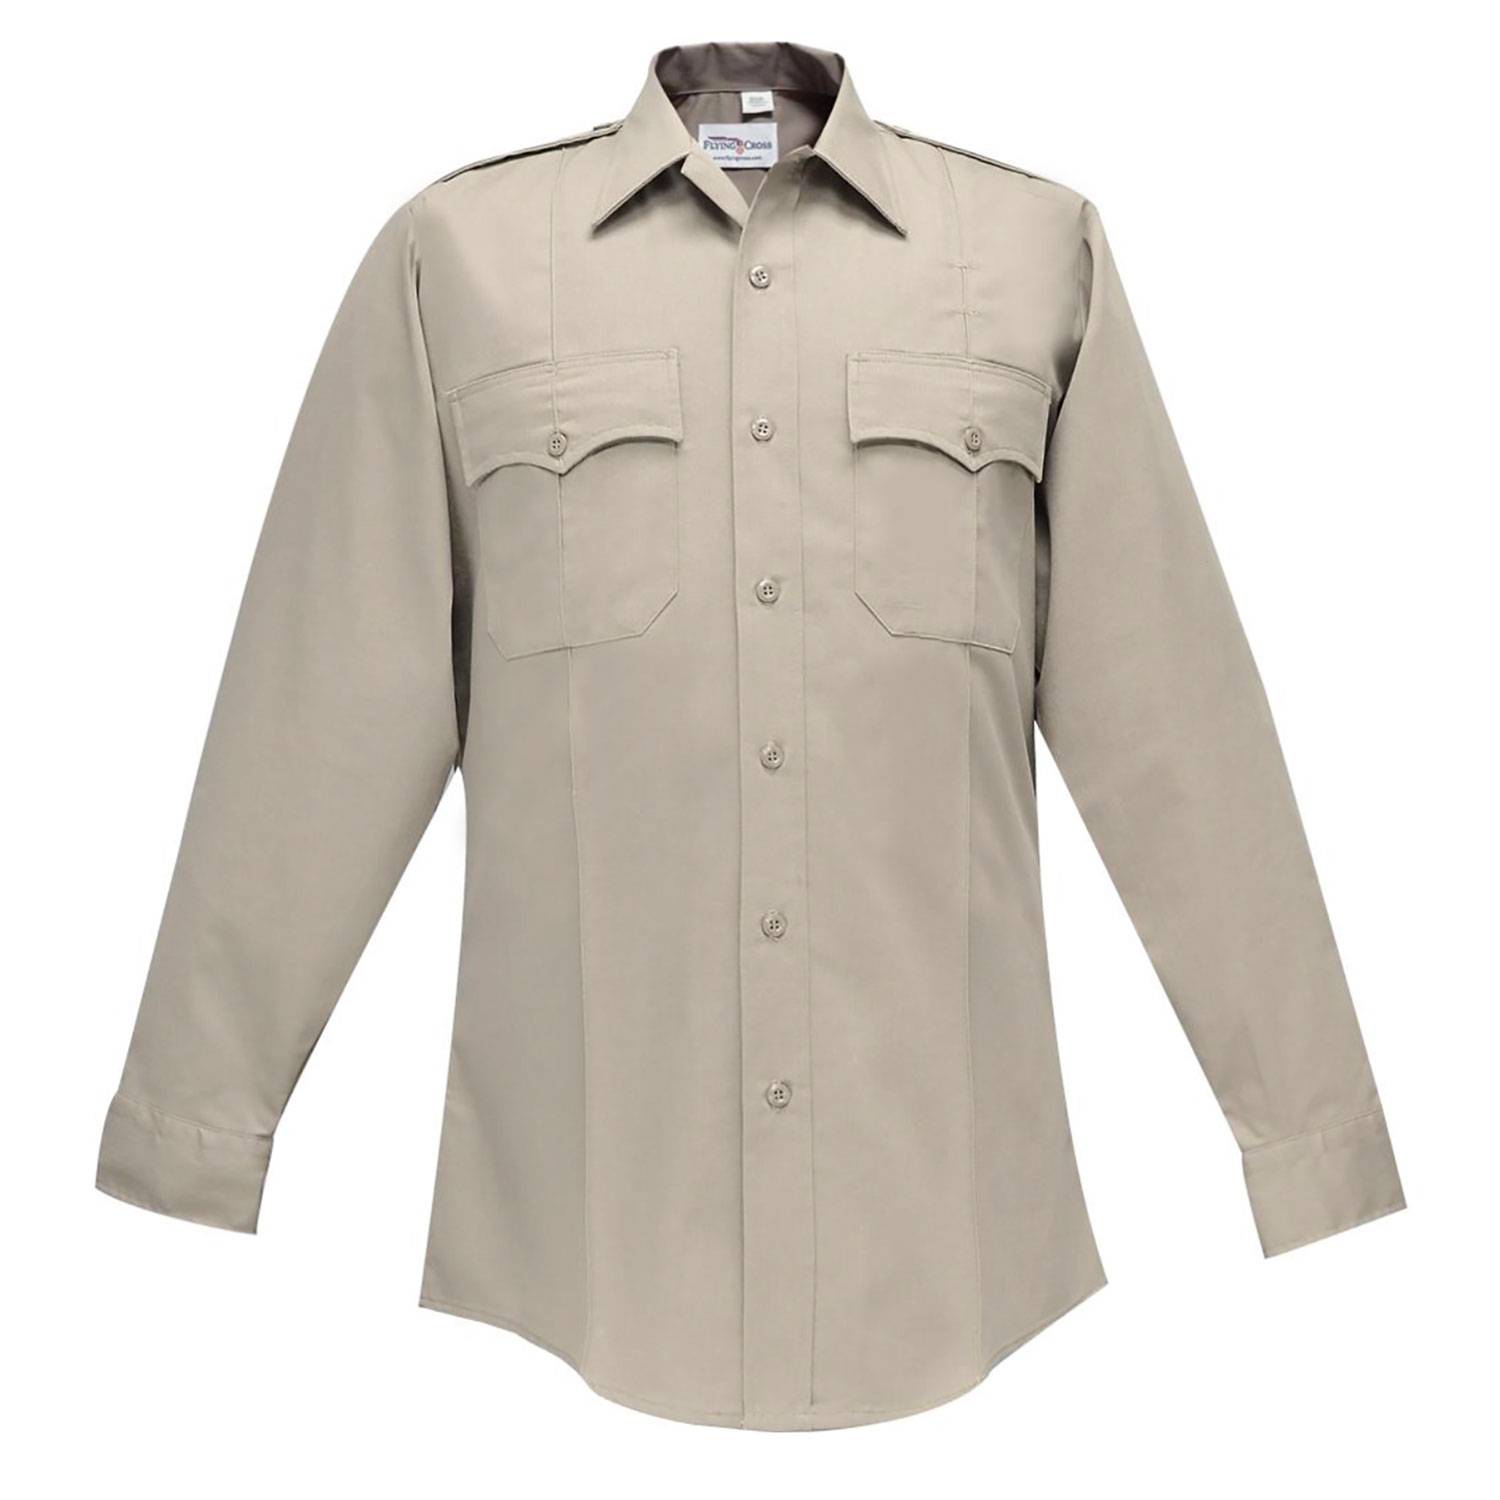 Flying Cross Command Long Sleeve Polyester Shirt with Zipper